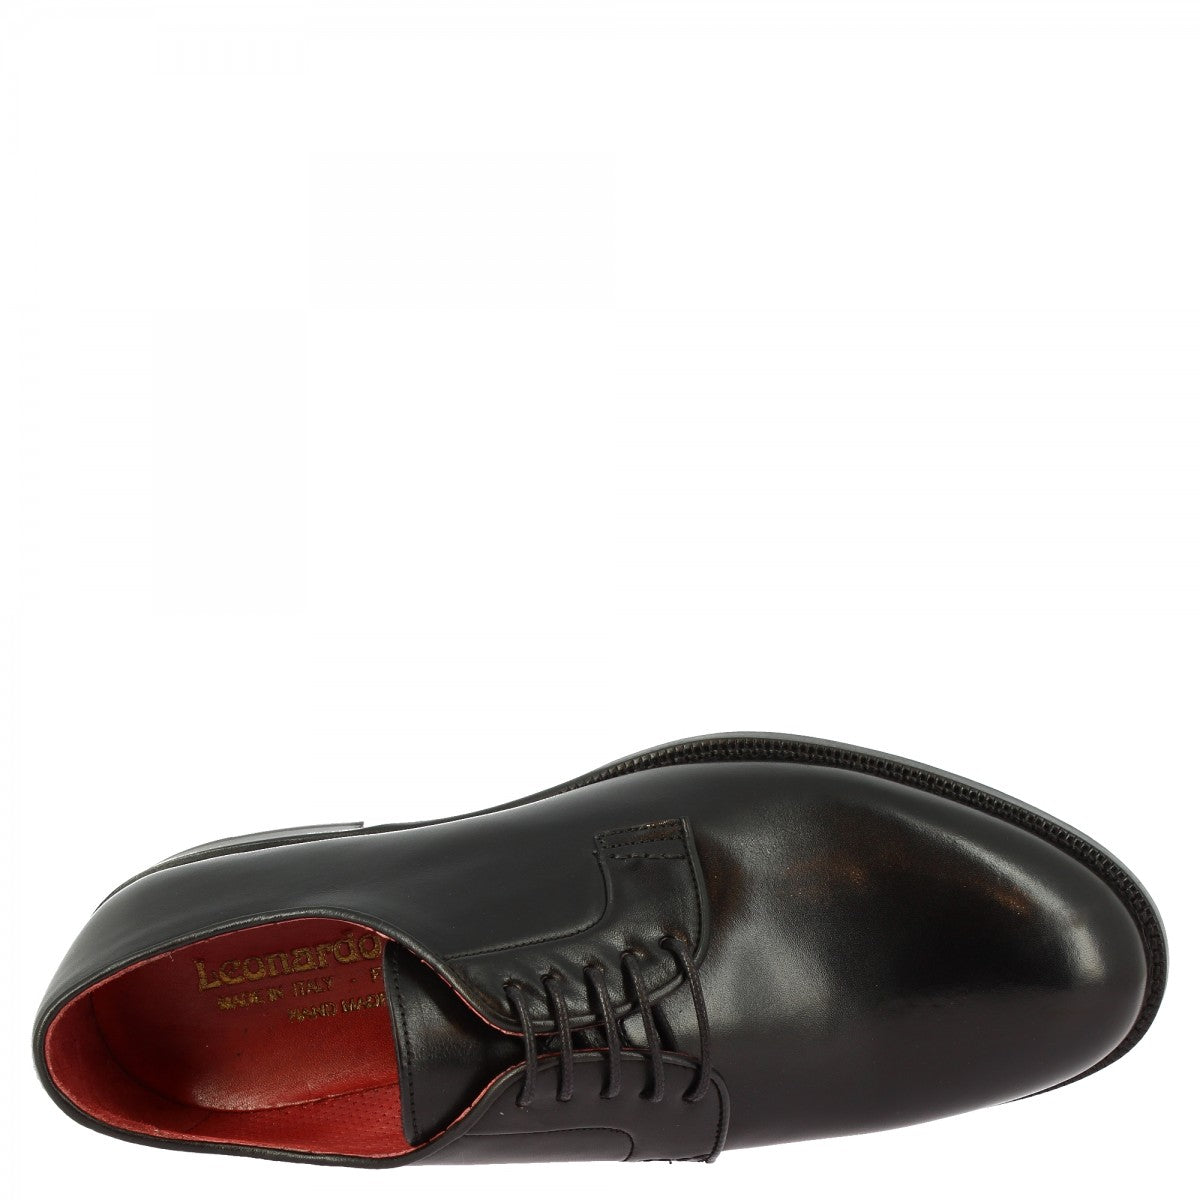 Men's handmade lace-up shoes in black calf leather